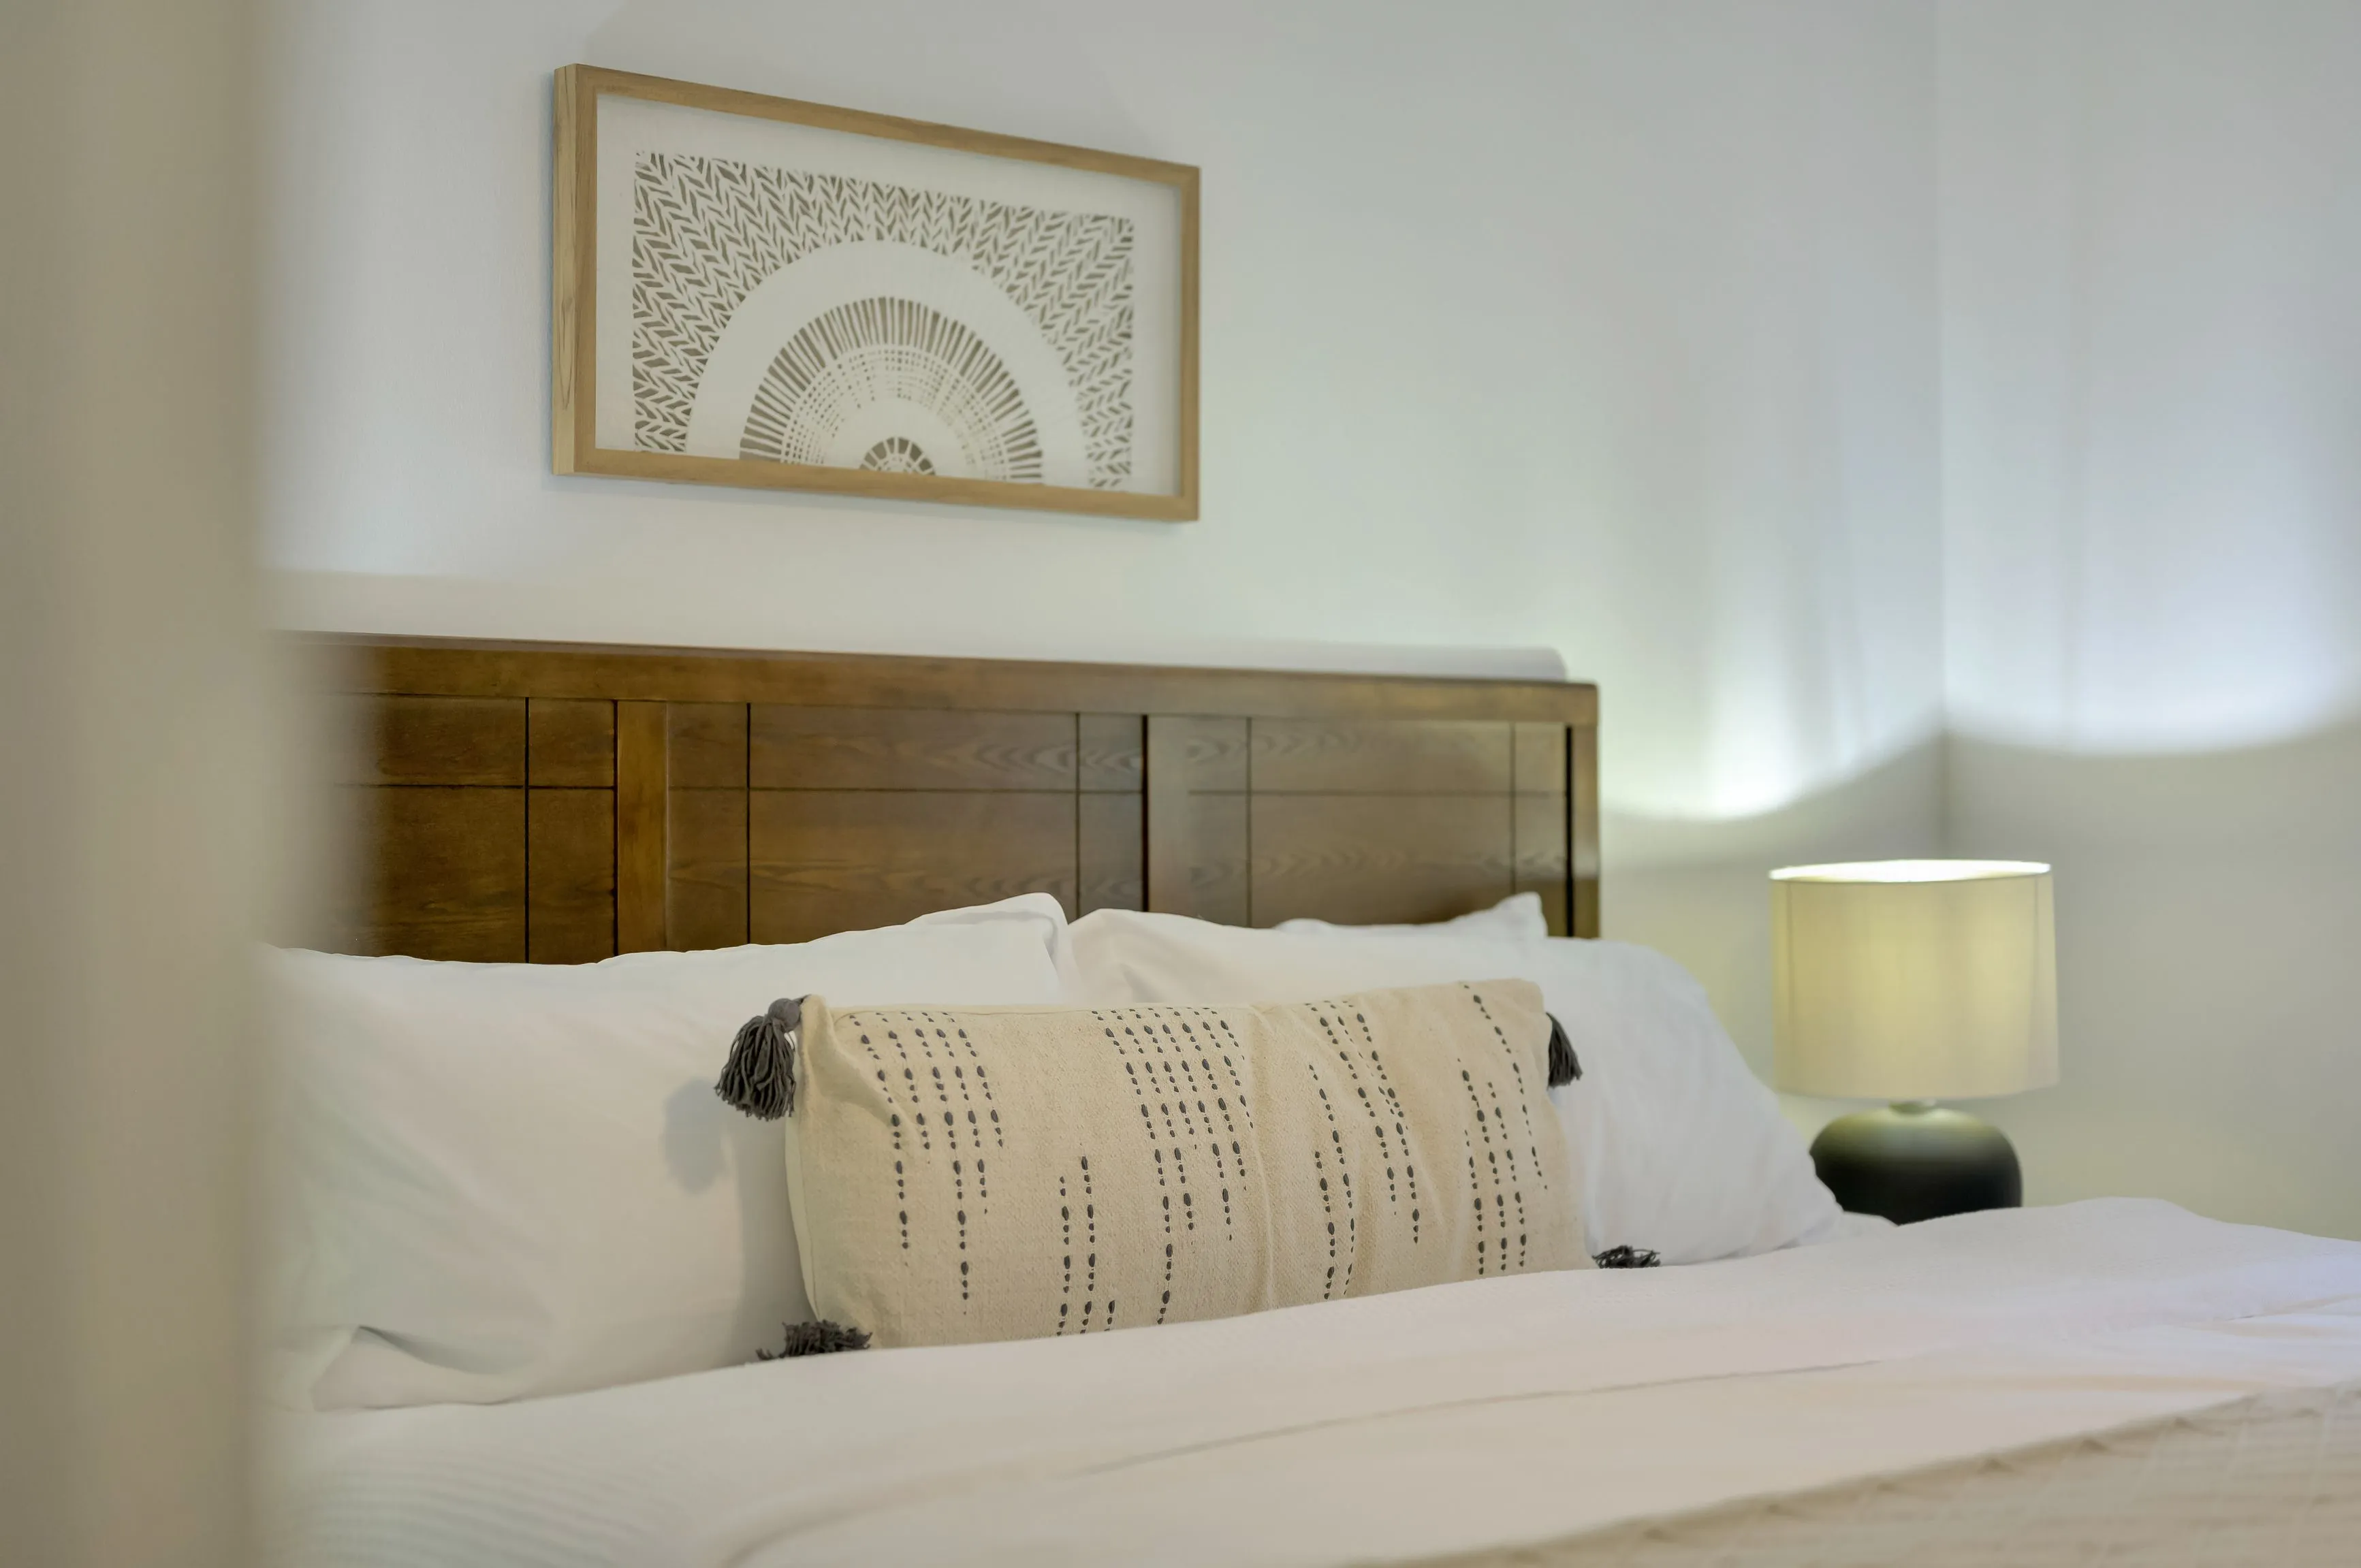 Elegantly made bed with white linens, decorative pillows, wooden headboard, artwork above the bed and a lit table lamp.